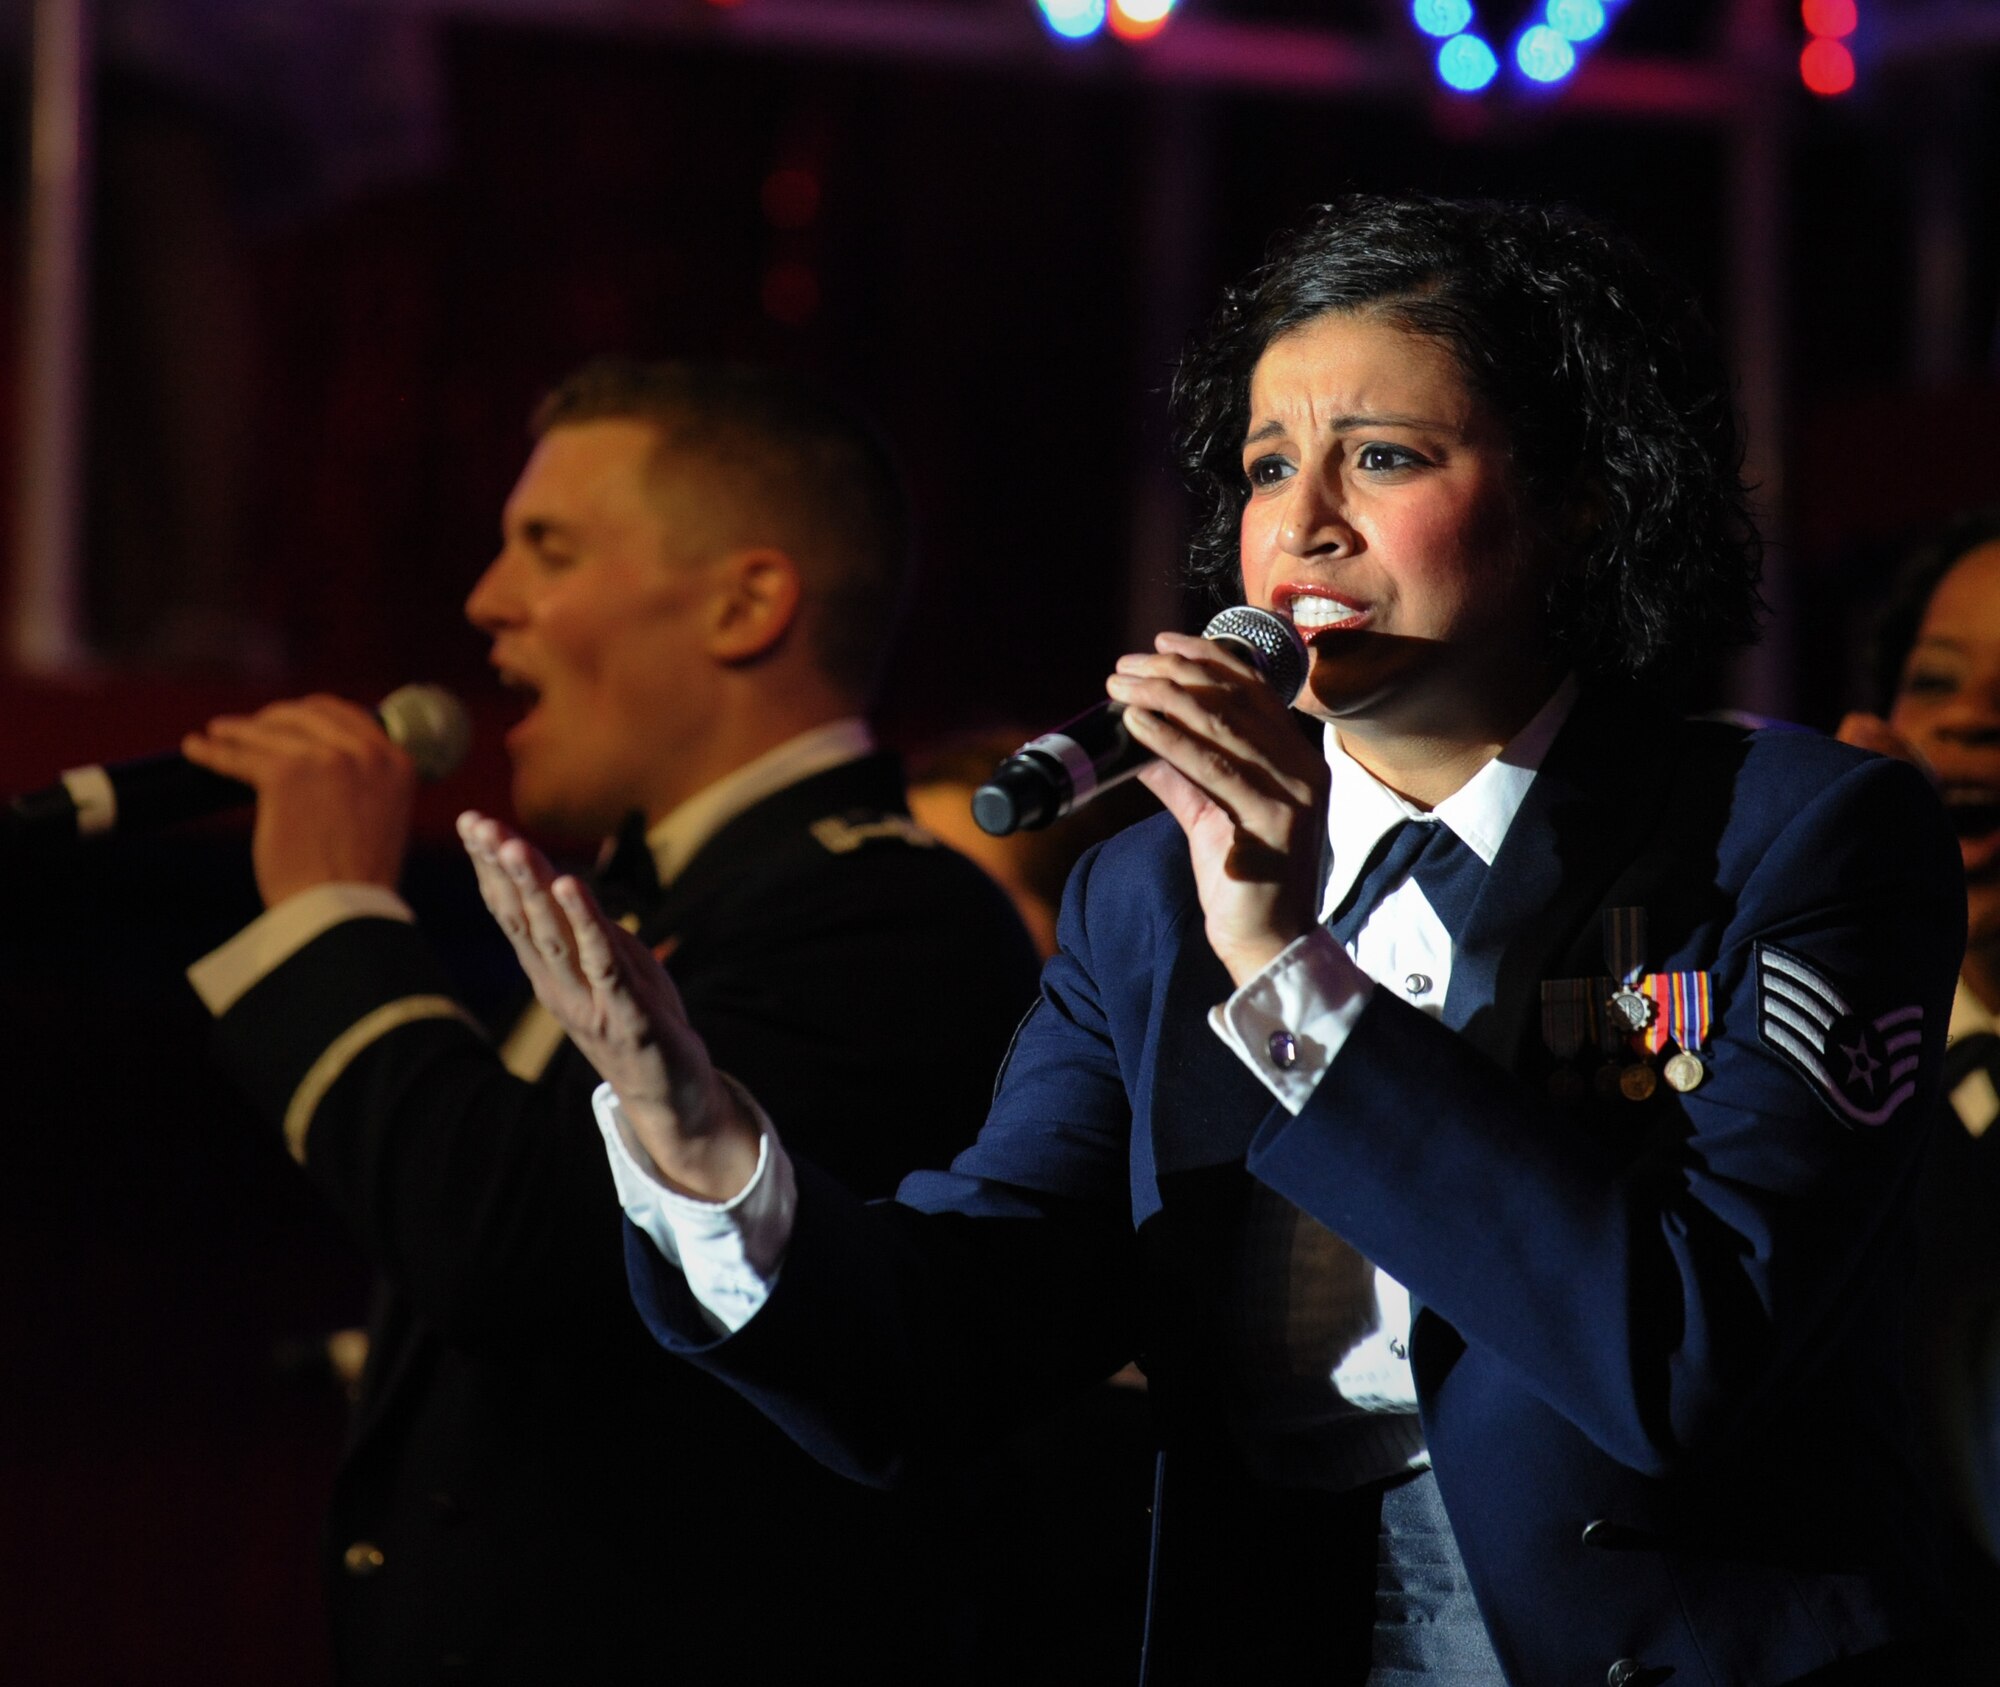 MOUNTAIN HOME AIR FORCE BASE, Idaho – Staff Sgt. Abigail Foster, a non-destructive inspection journeyman with the 92nd Maintenance Squadron, Joint Base San Antonio – Lackland AFB, Texas, sings “God Bless the USA,” the final number of the show, during the Tops in Blue Rhythm Nation Tour here June 18. Tops in Blue is composed of 35 to 40 vocalists, musicians, dancers, and technicians. (U.S. Air Force photo by Staff Sgt. Gina Chiaverotti-Paige)